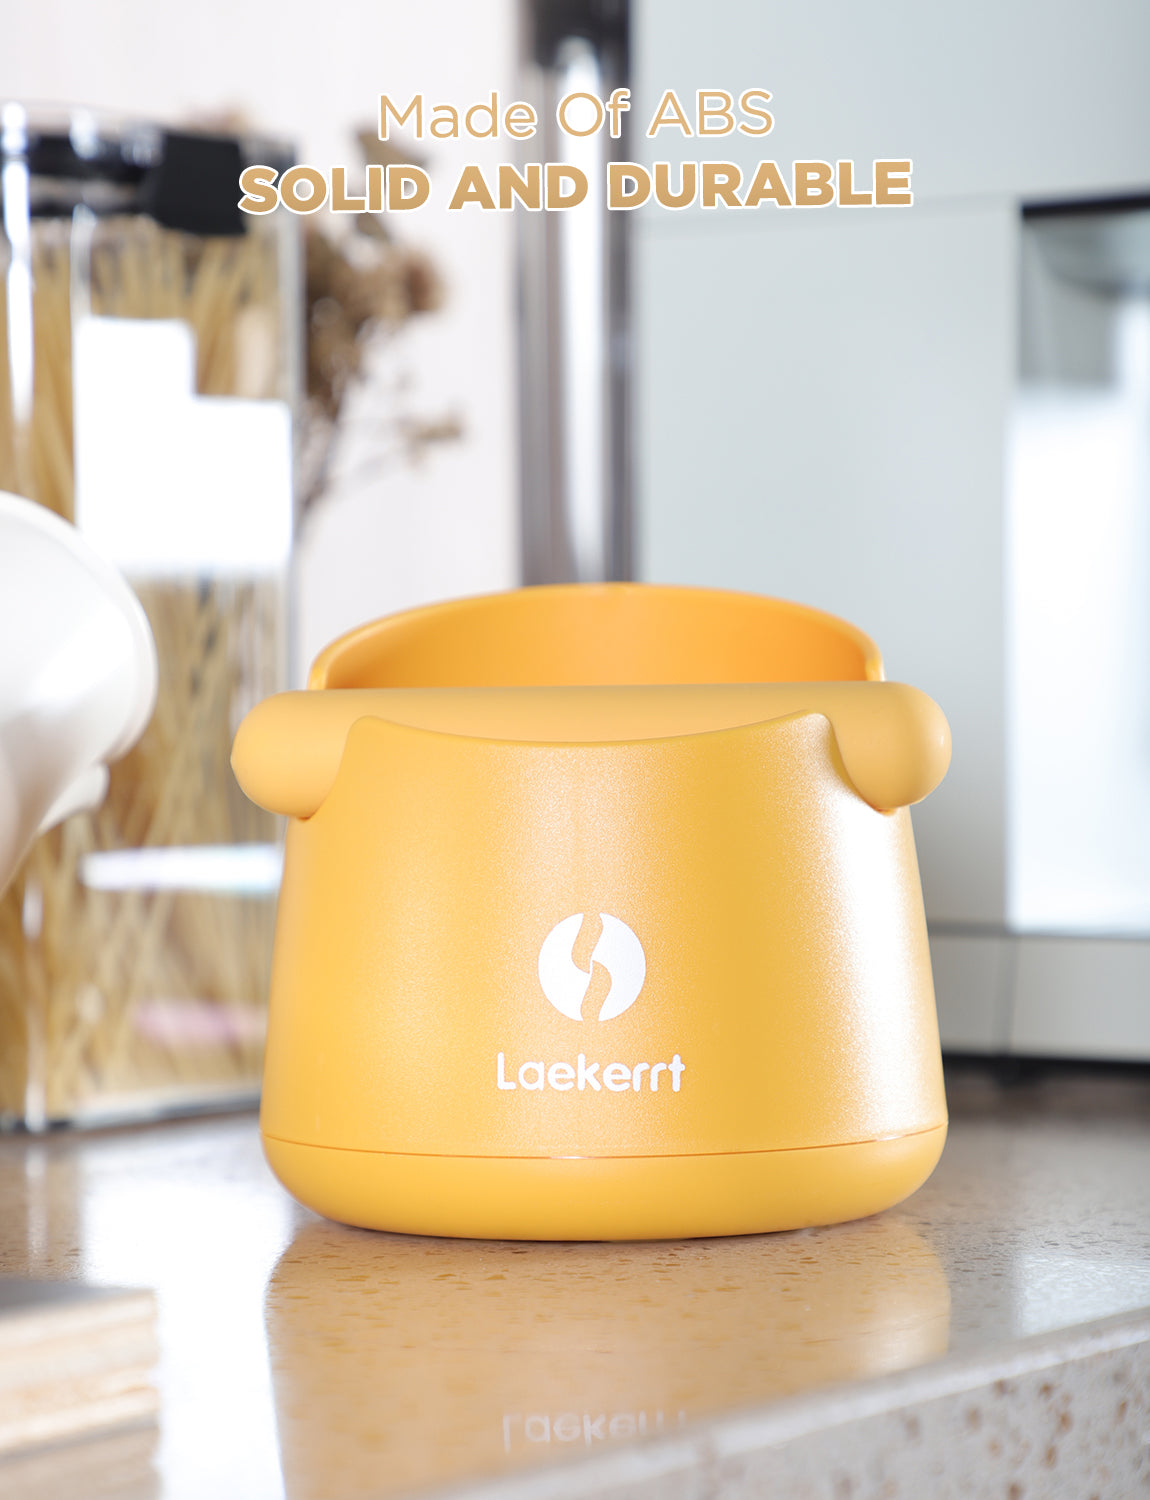 Laekerrt Espresso Knock Box, Compact Mini Coffee Grounds Knock Box, Shock-Absorbent Durable, with Removable Knock Bar and Non-Slip Base, Breville Espresso Machine Accessories Gift, Yellow 4.5 Inch